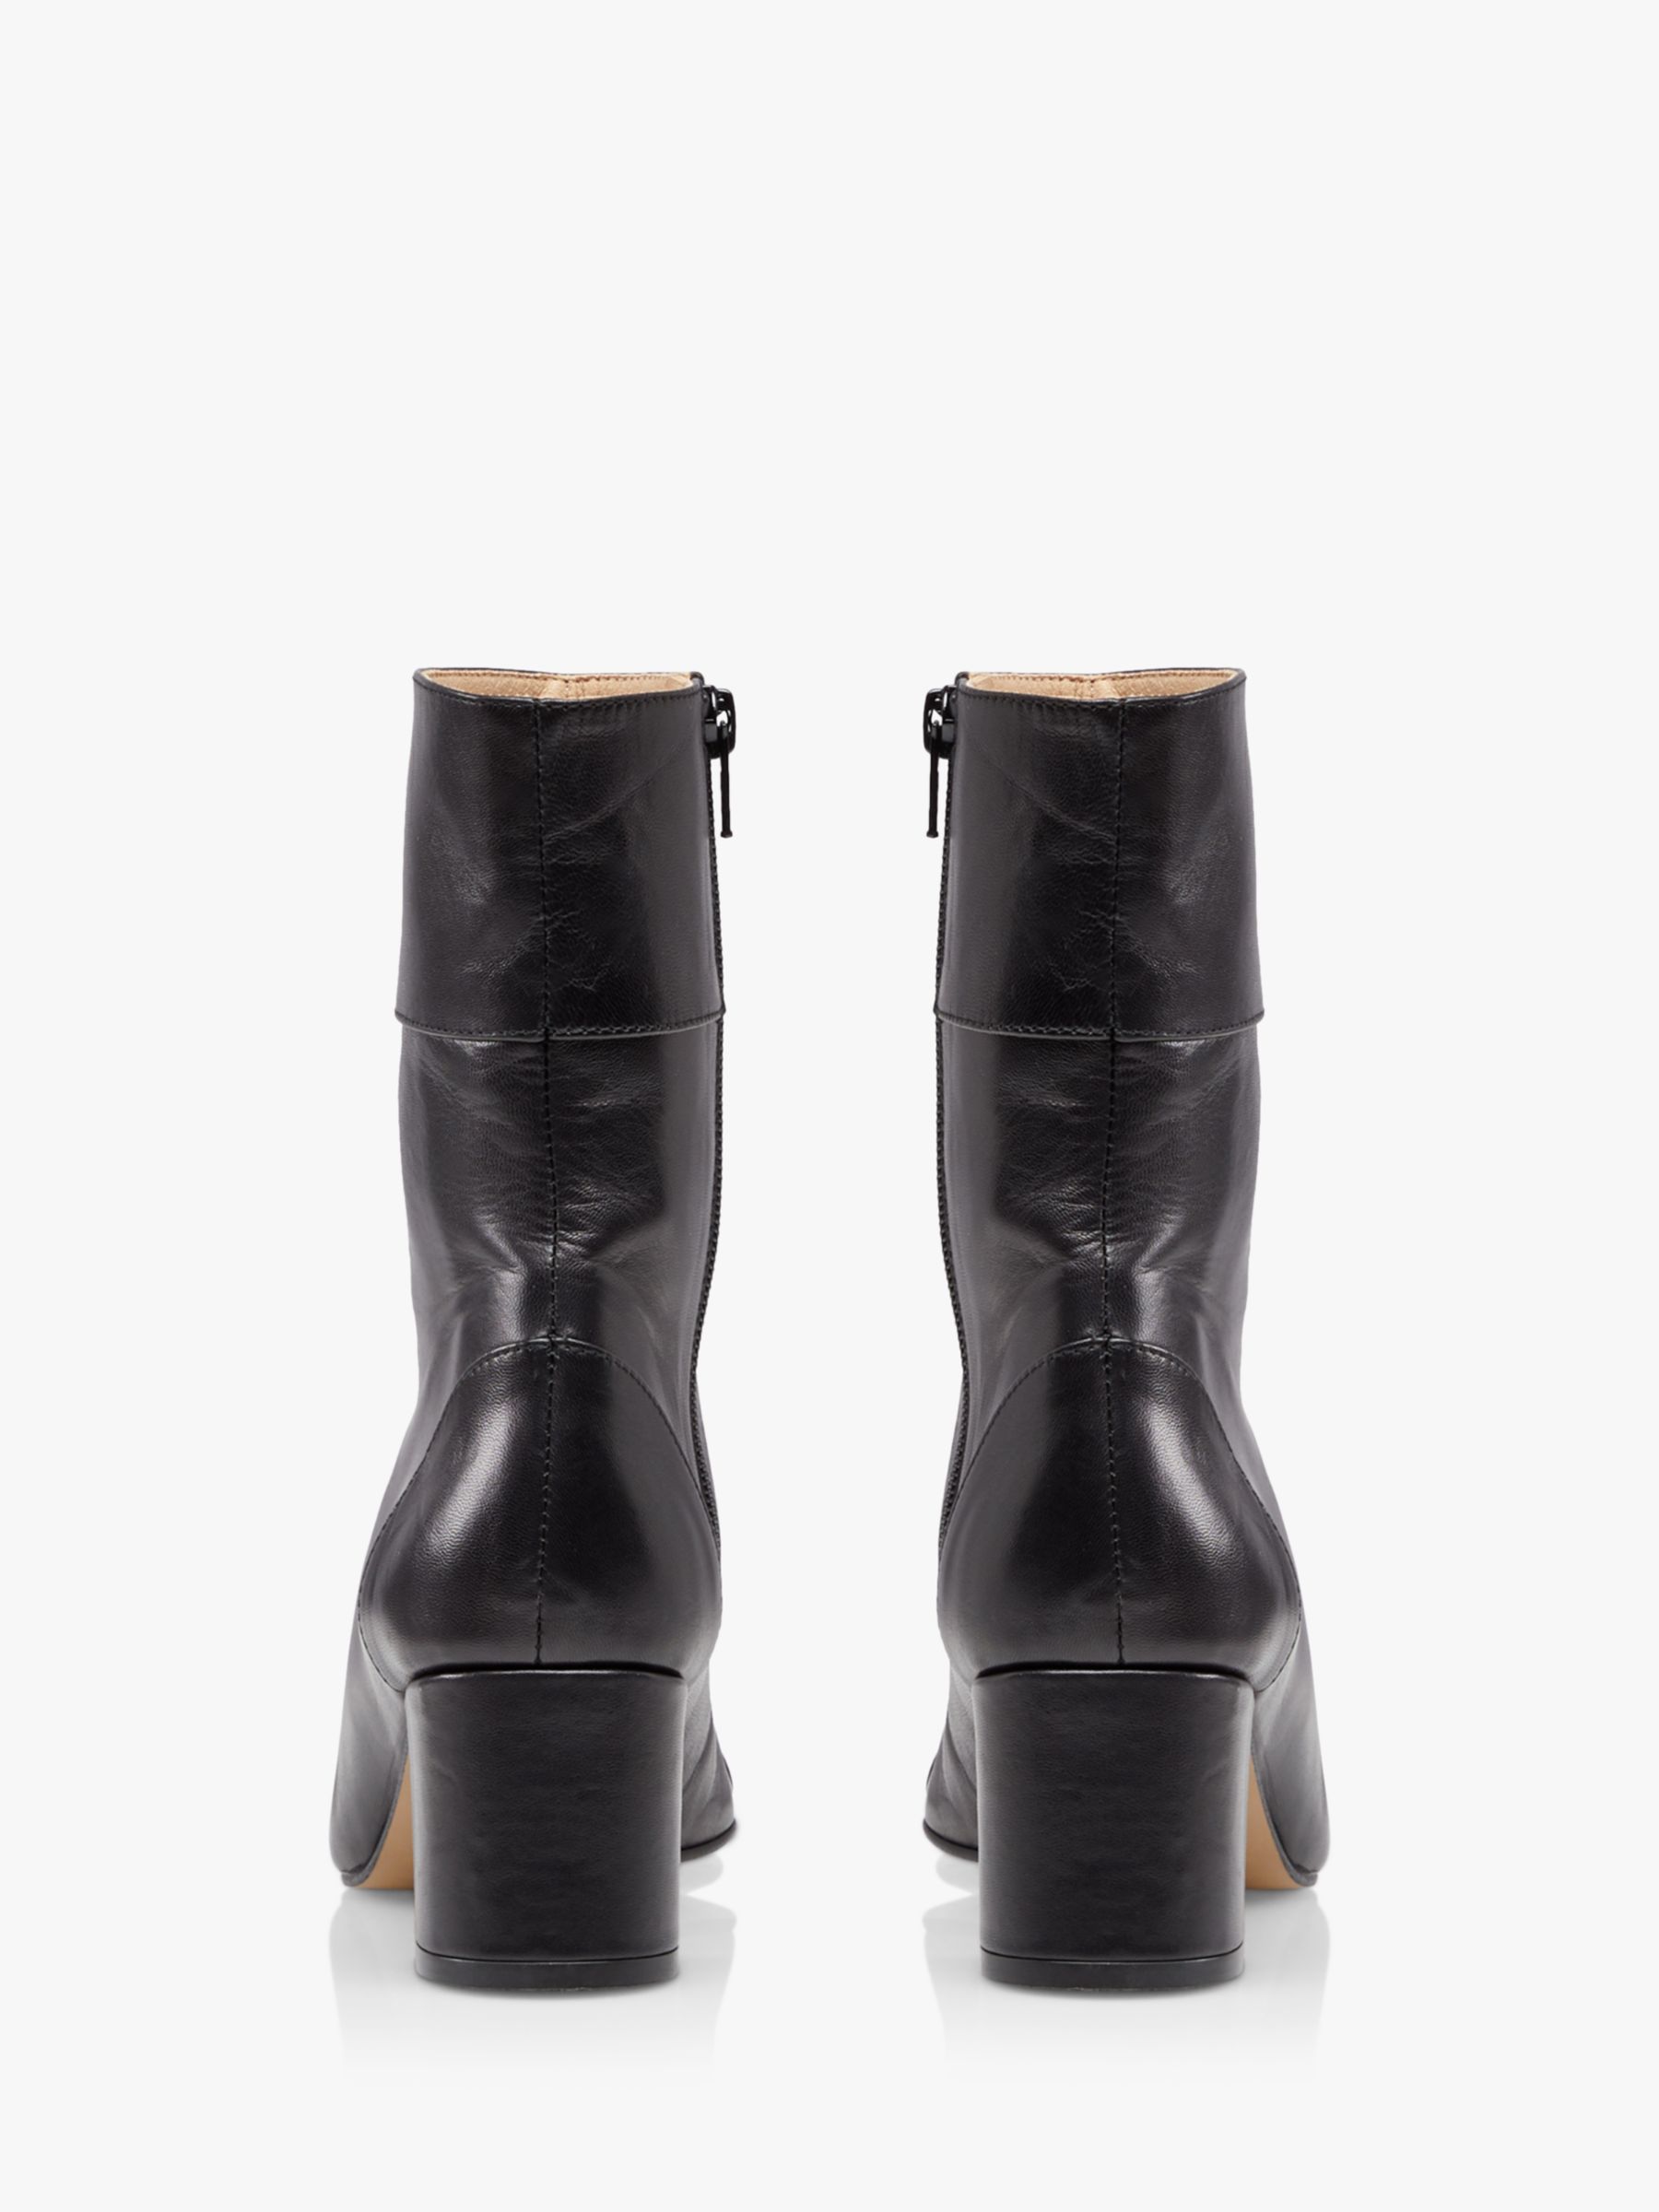 Dune Onyx Leather Ankle Boots, Black at John Lewis & Partners